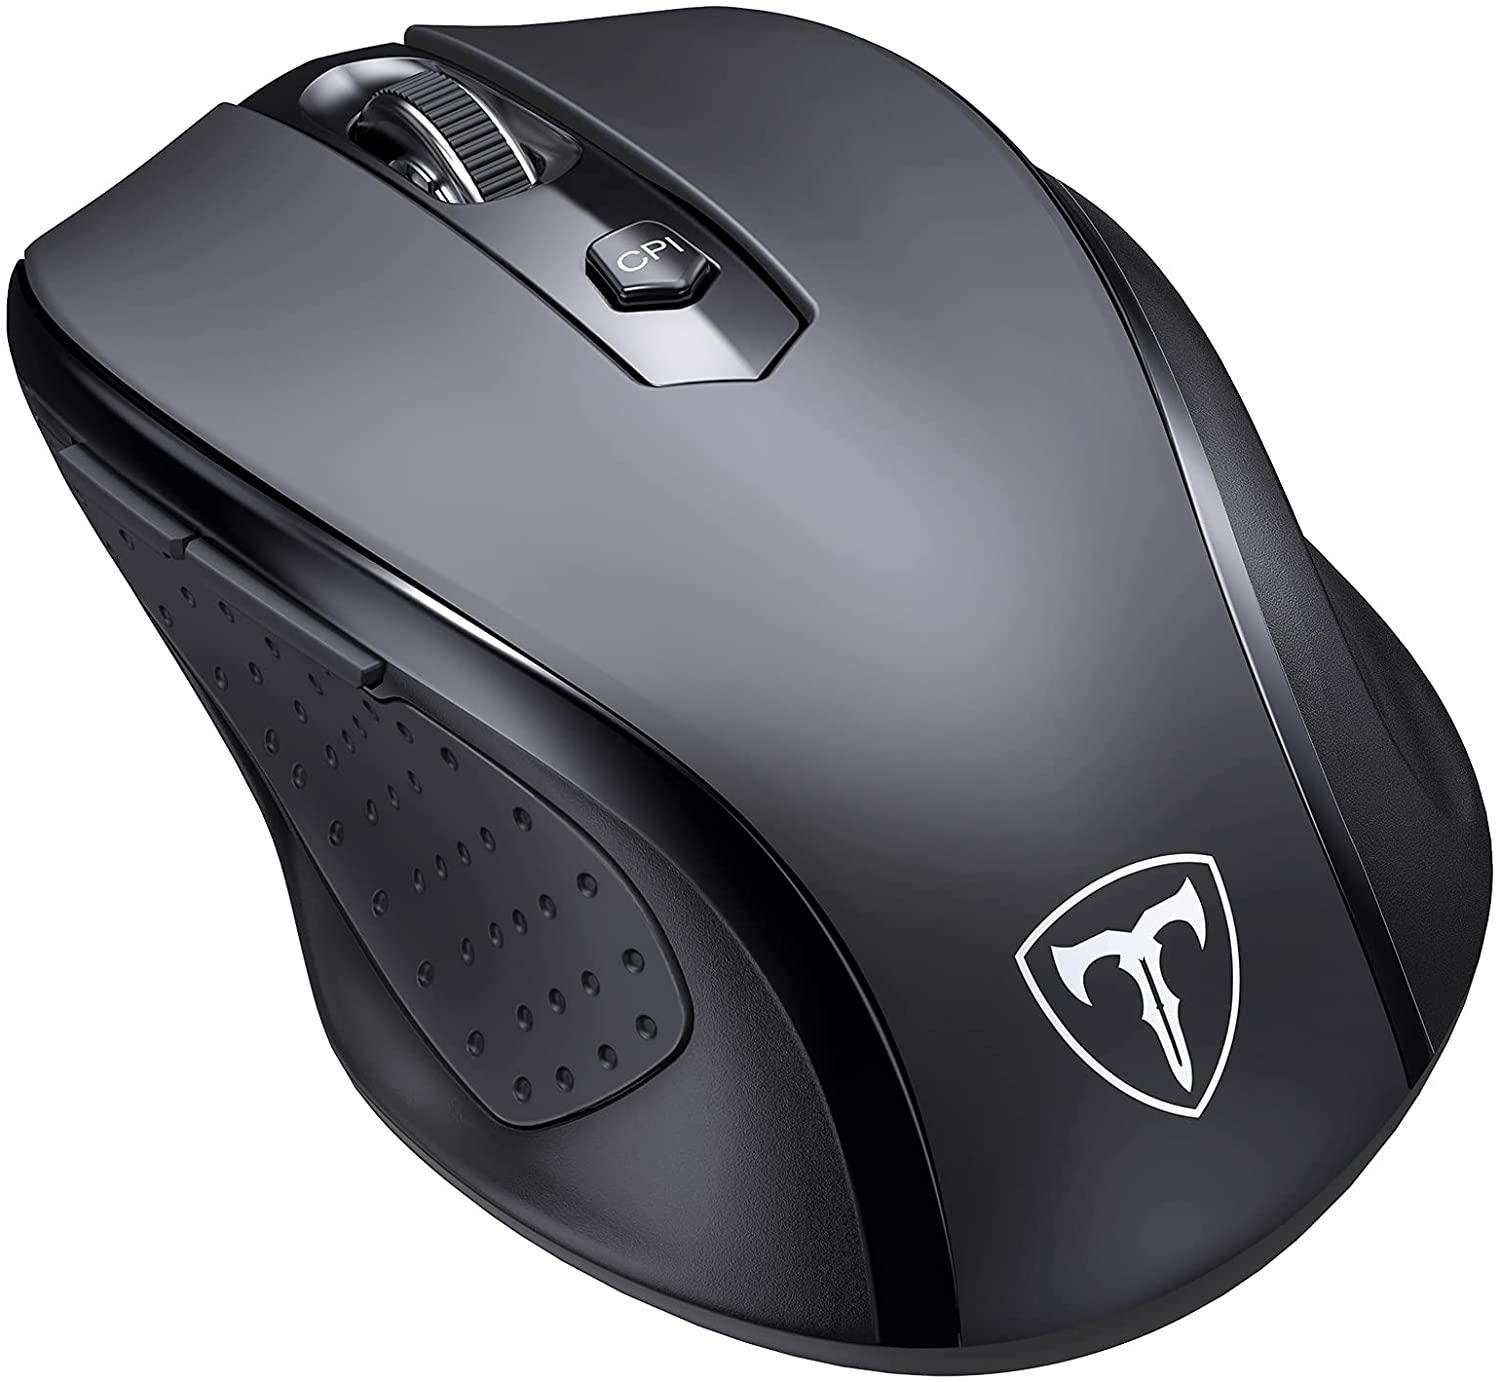 2.4Ghz Wireless Computer Mouse for $3